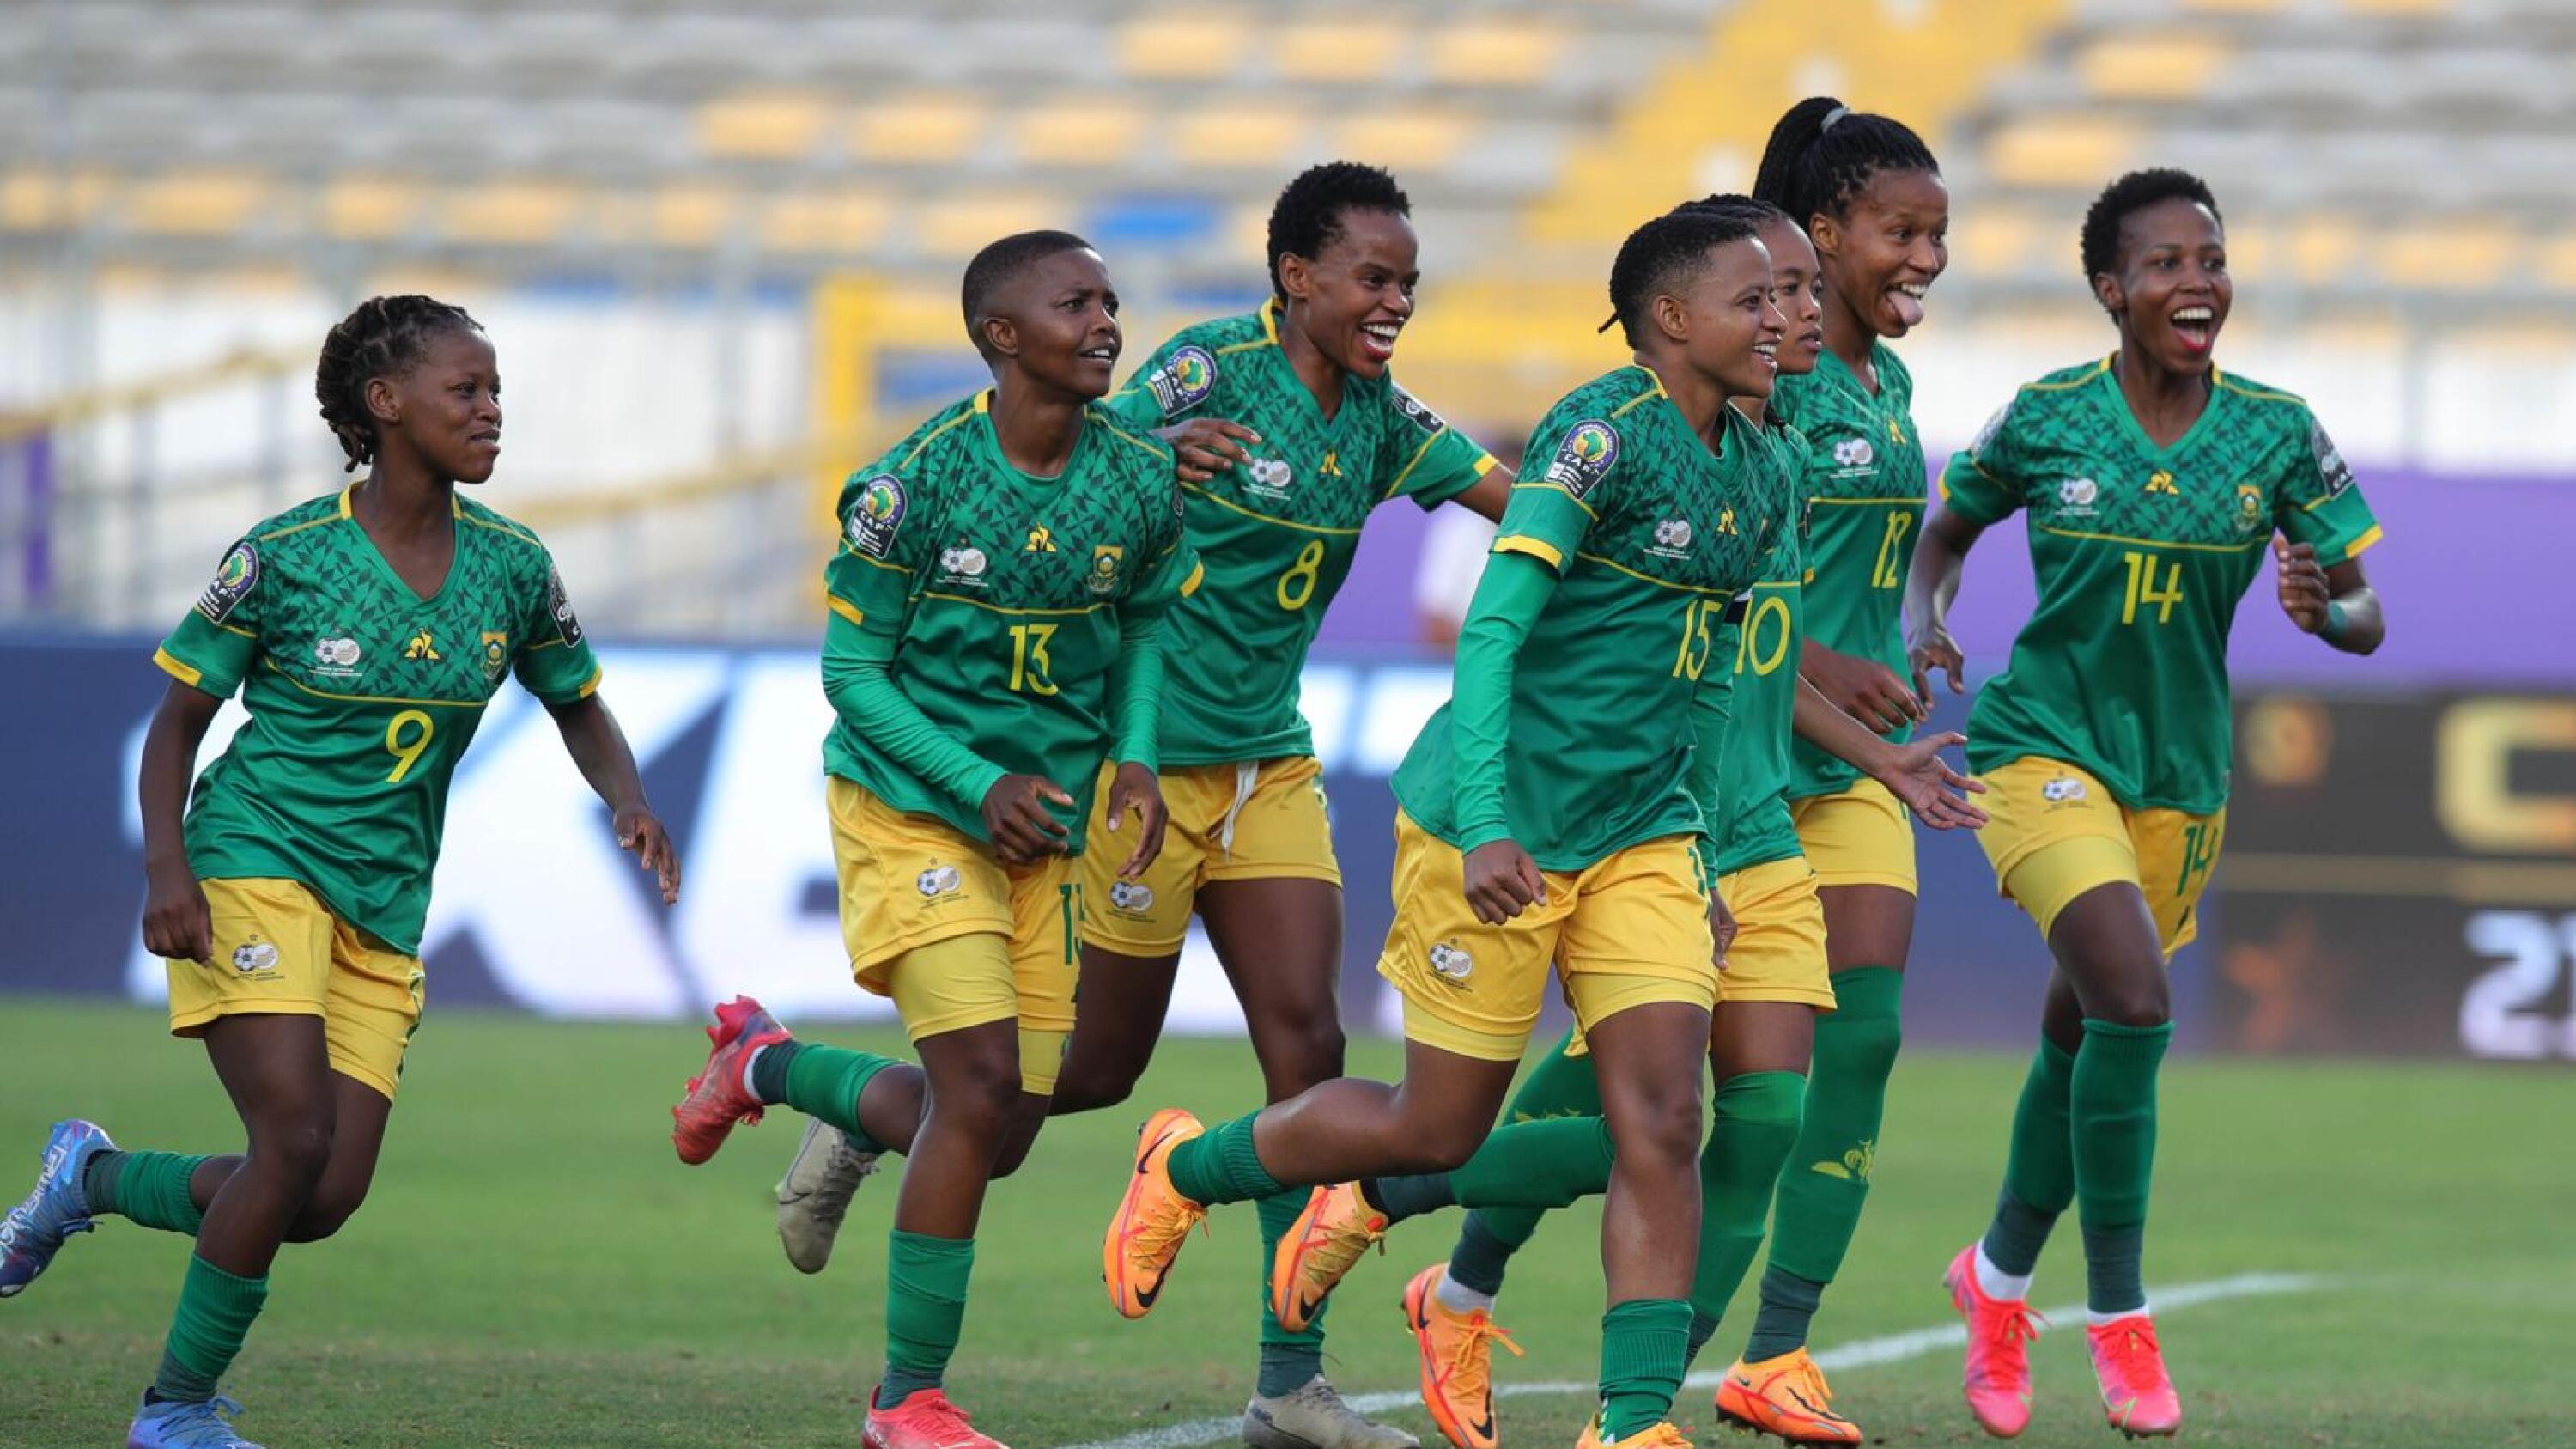 South Africa’s Linda Motlhalo celebrates with teammates after scoring a late winning goal during their Womens Africa Cup of Nations semi-final against Zambia in Casablanca on Monday